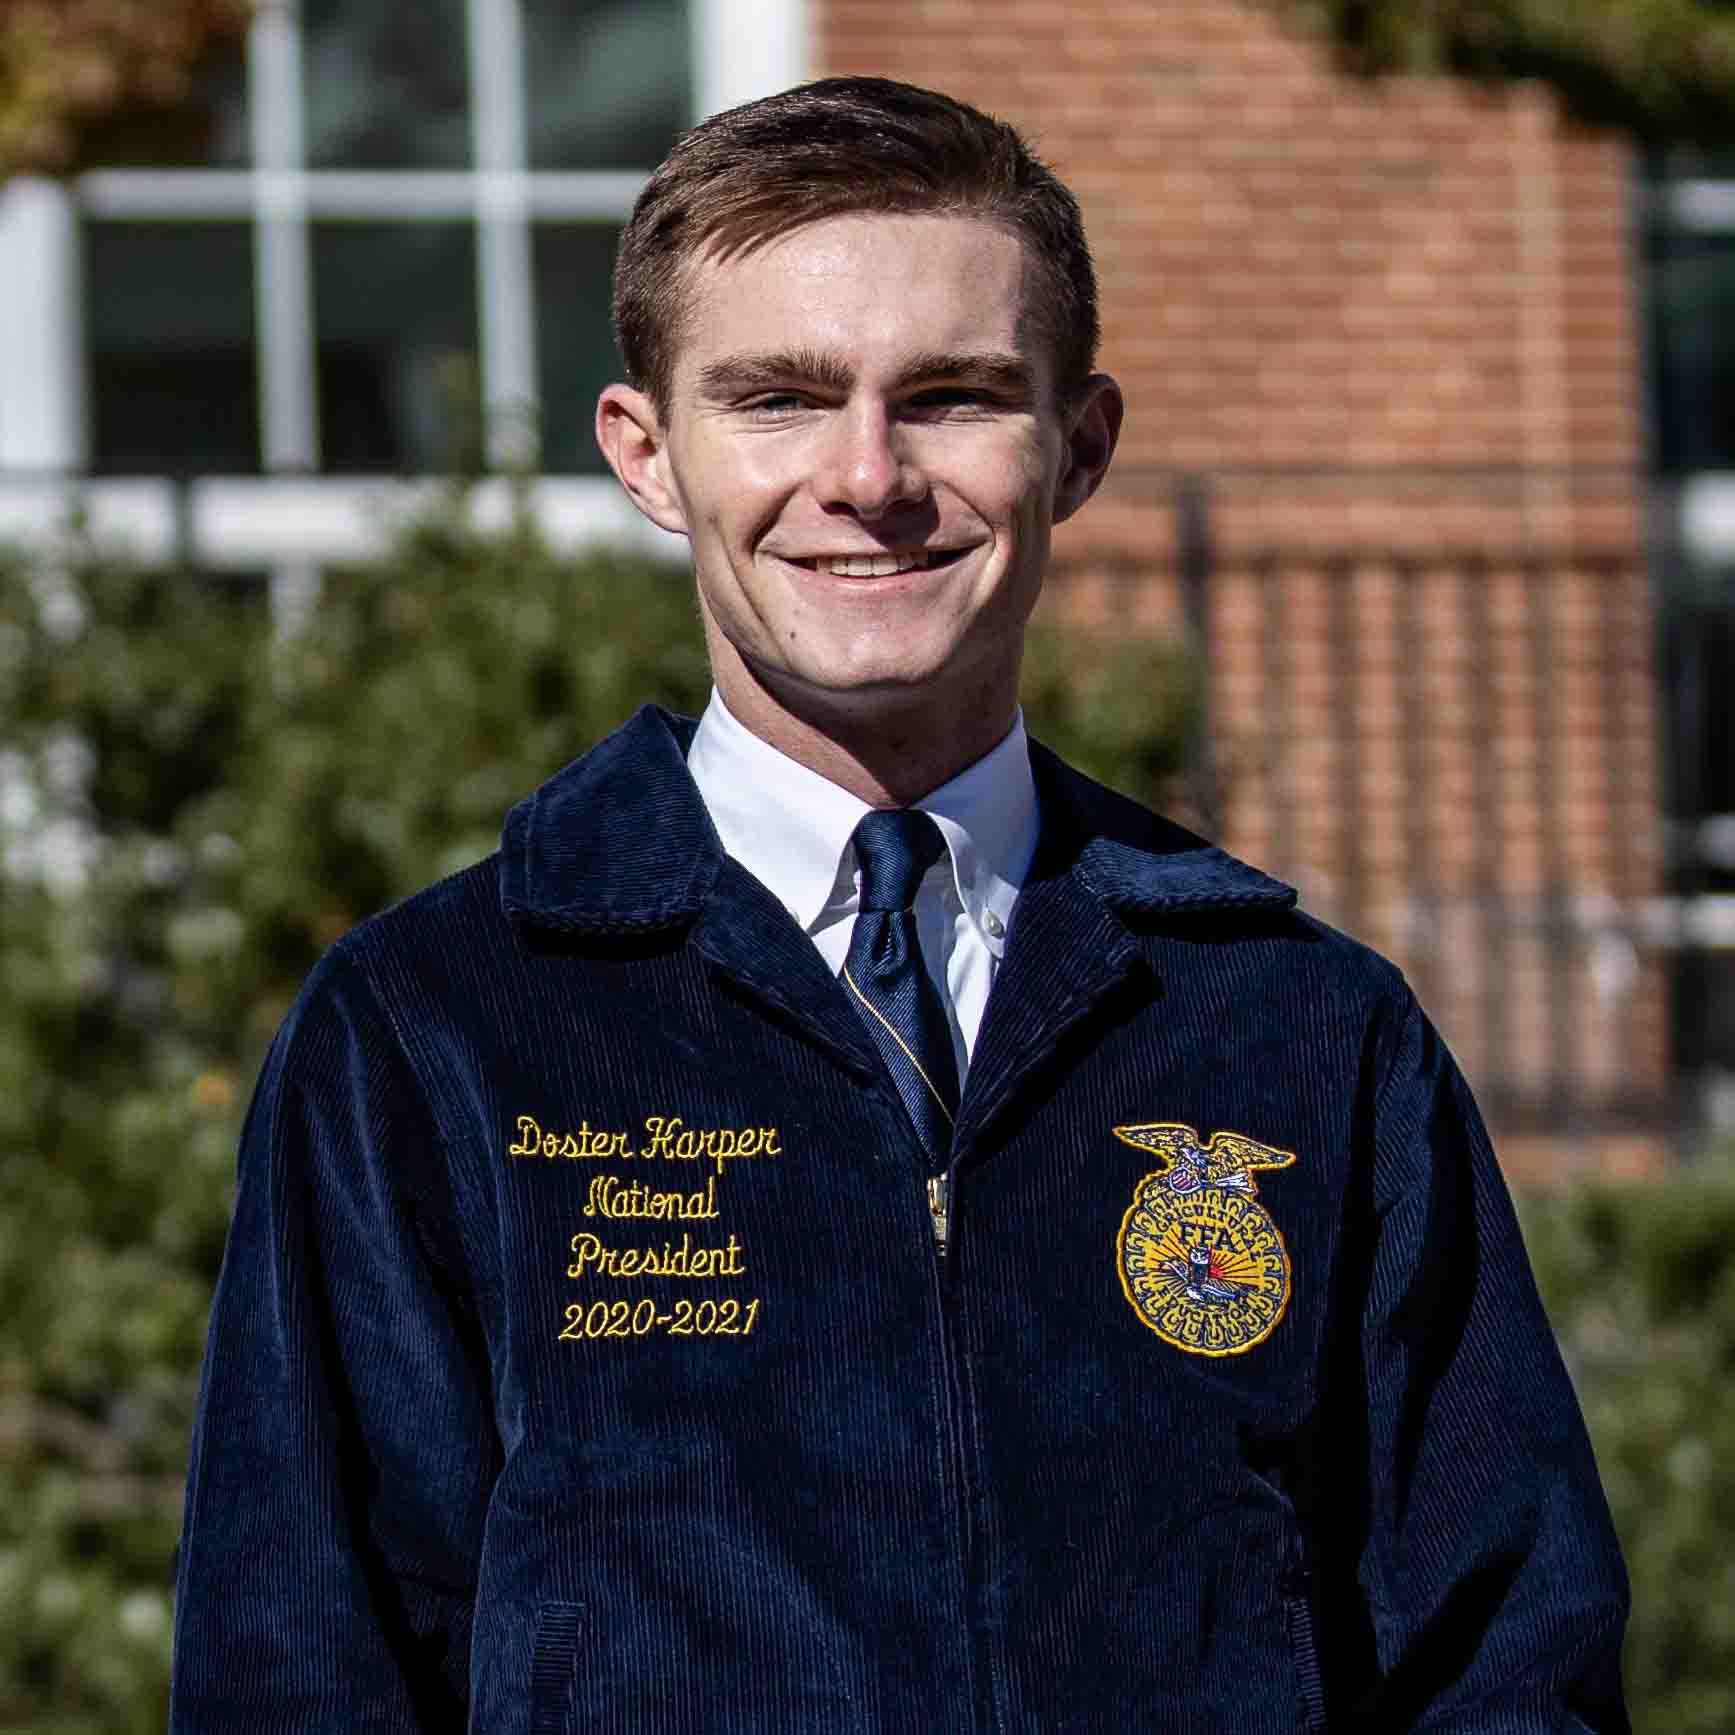 Doster Harper, a junior studying agriscience and environmental systems at the College of Agricultural and Environmental Sciences, was named president of the 2020-21 National FFA Officer Team. Harper is from Covington, Georgia, and attended Newton College and Career Academy. (Photo by Sean Montgomery)